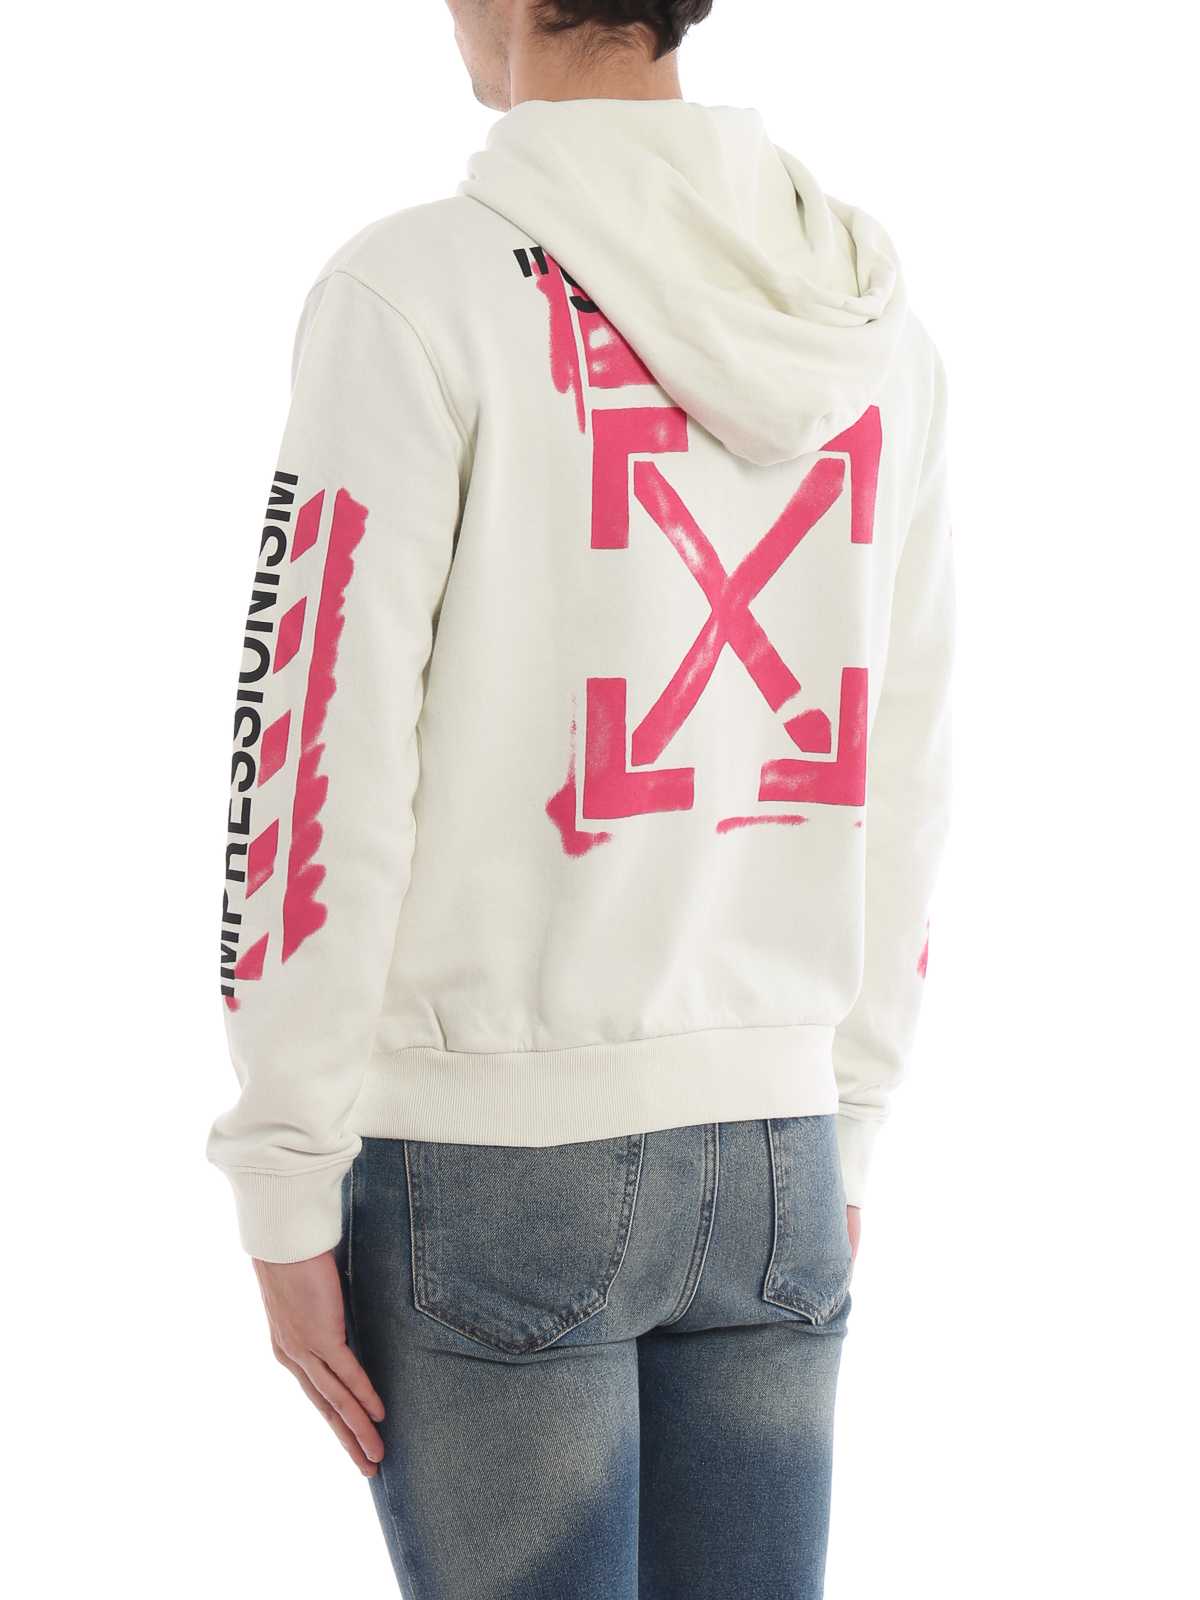 off white colour hoodie